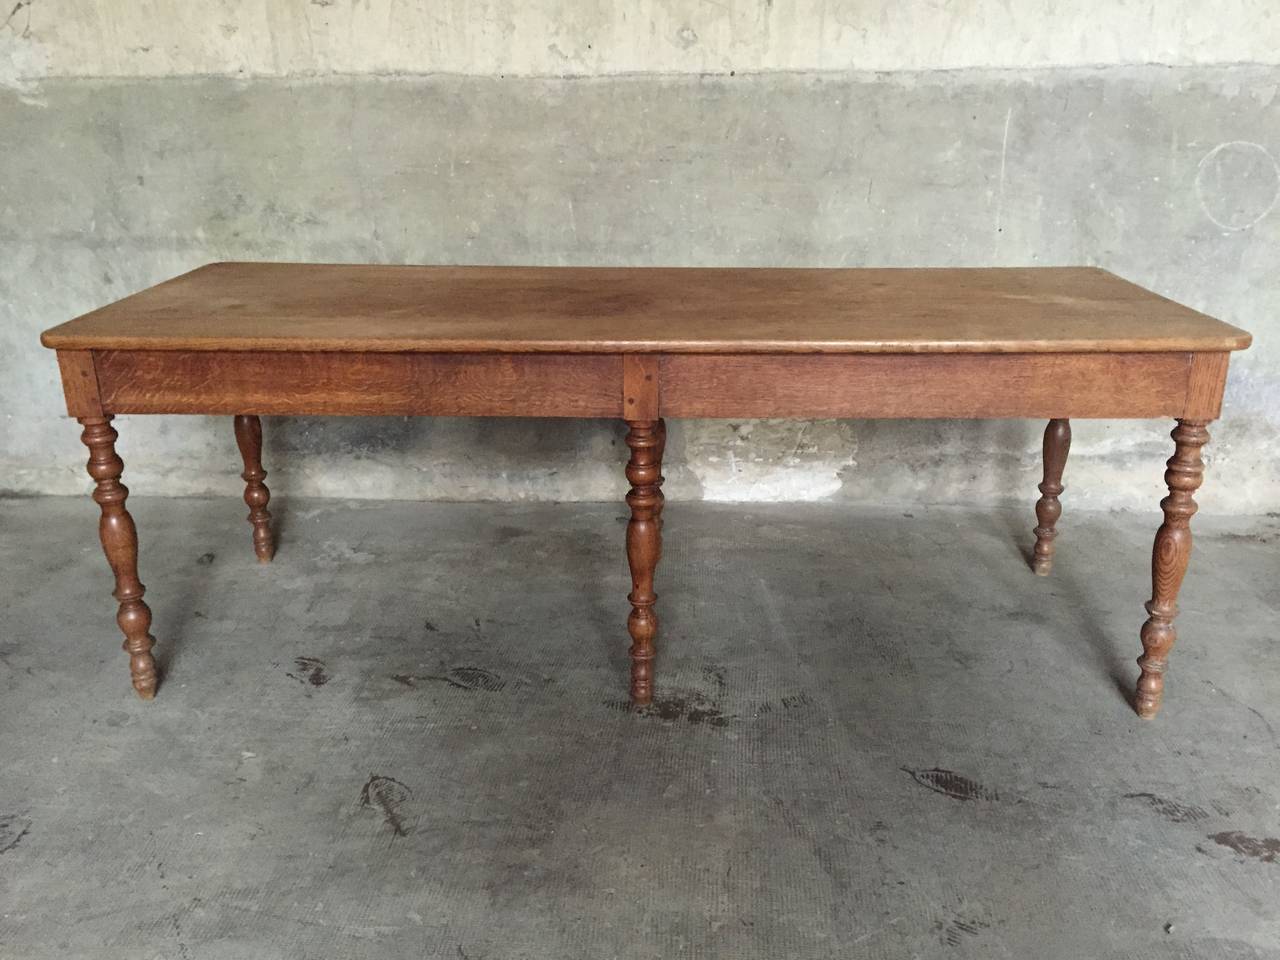 Very good quality for this draper table in oakwood, possibility to use for dining table, circa 1880.

Measures: Diameter 213 x 80 x 77 cm.